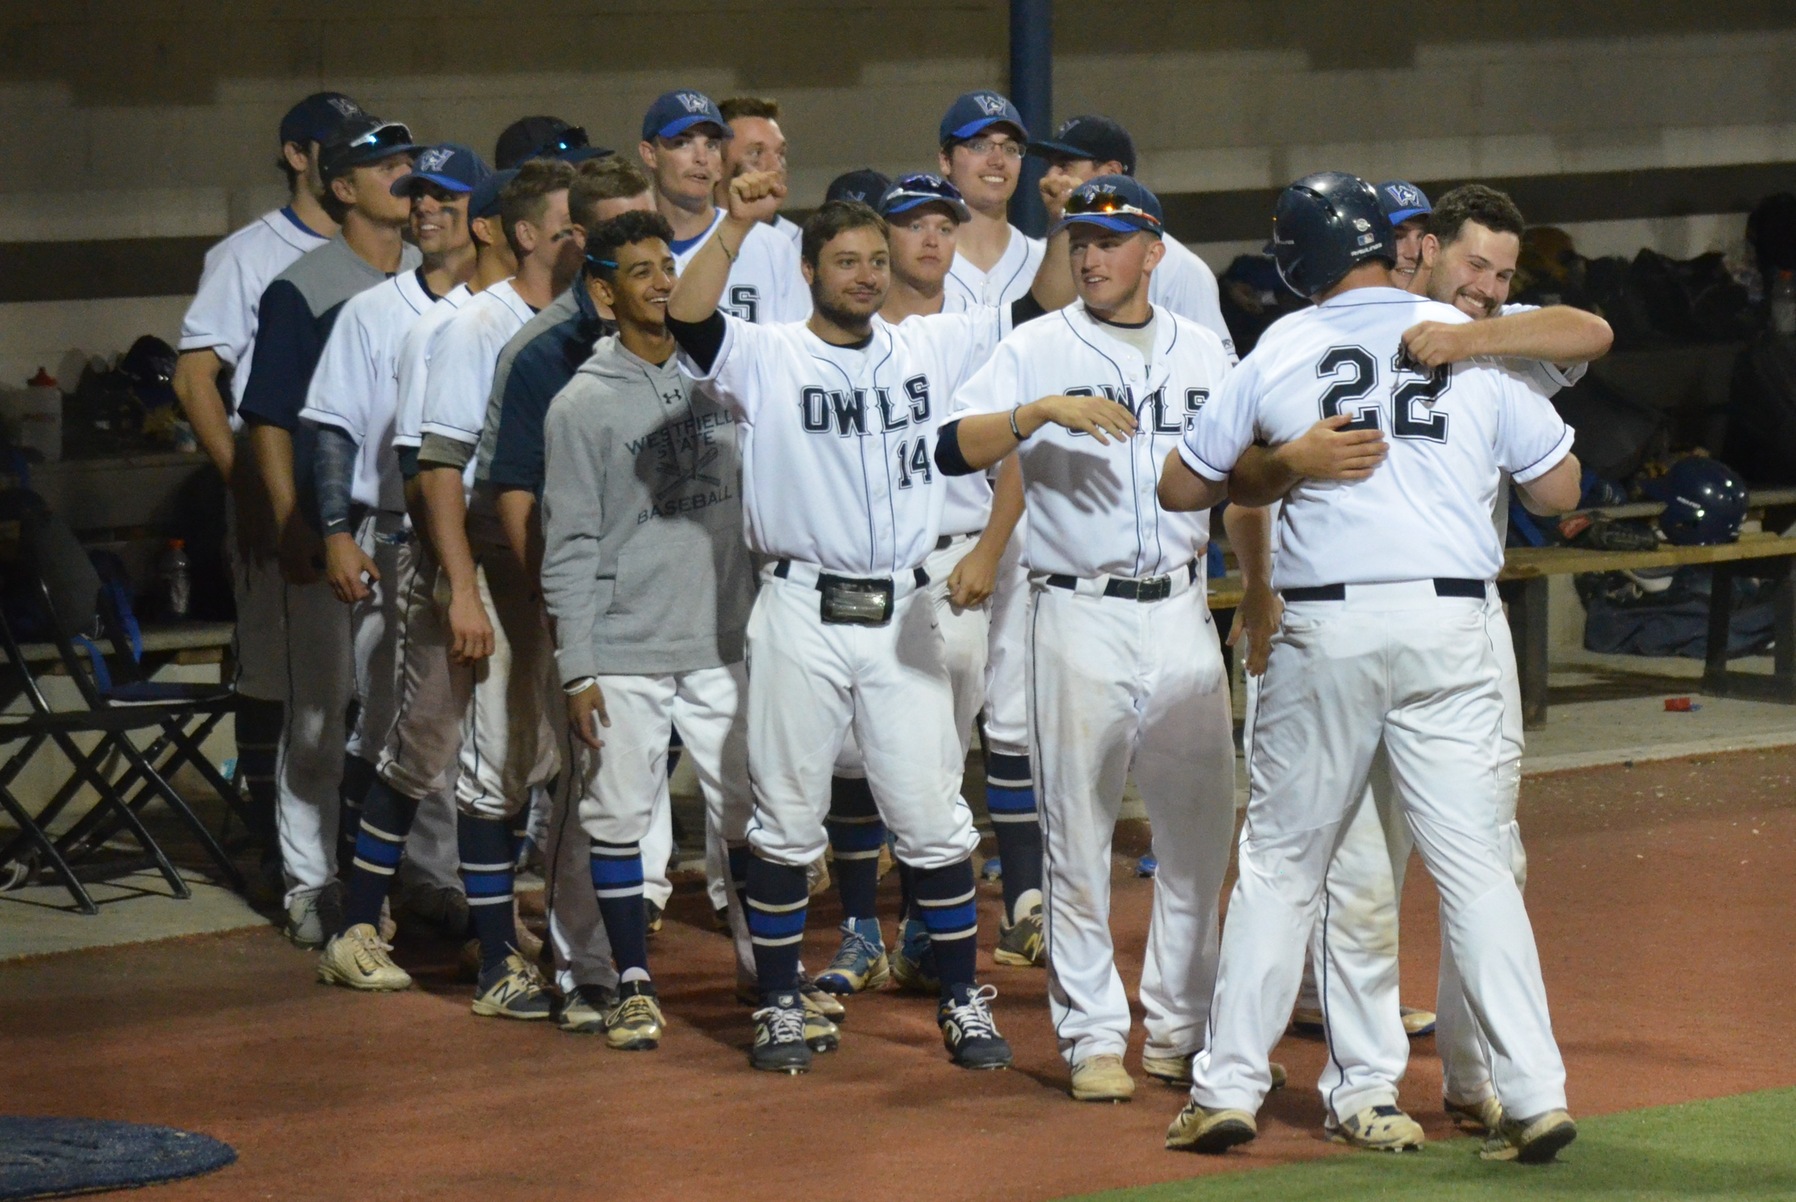 Westfield State senior pitcher John Gegetskas (22) gets a hug from Jake Gibb and is cheered by his teammates after being lifted for a pinch runner after Gegetskas walked in his only career plate appearance in the ninth inning against Shenandoah in the NCAA Tournament.